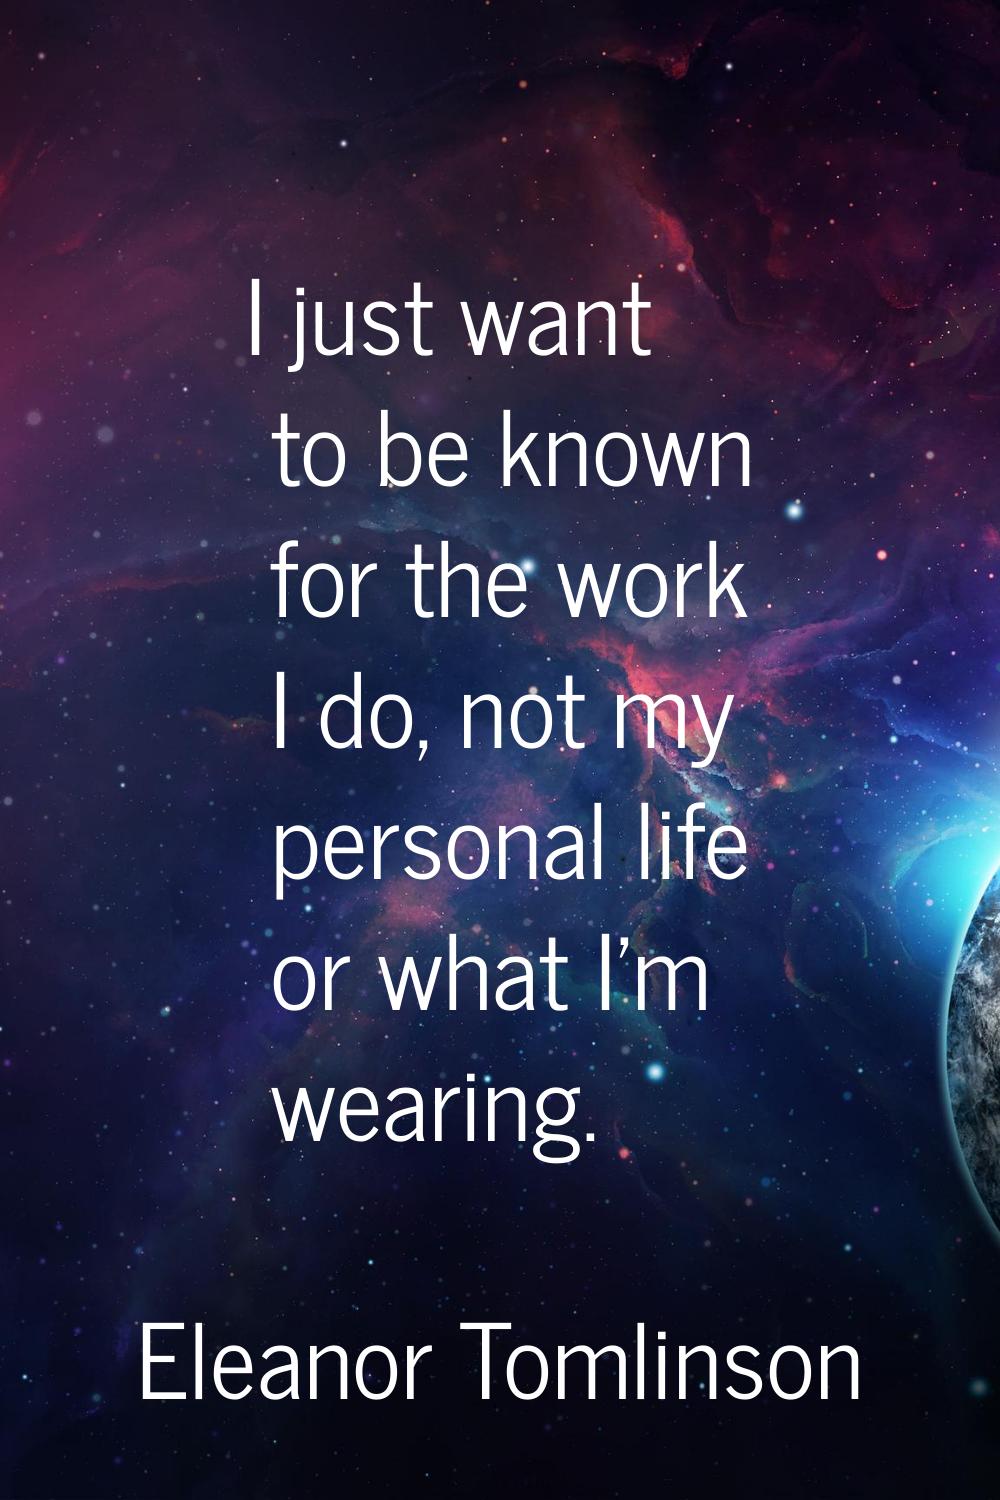 I just want to be known for the work I do, not my personal life or what I'm wearing.